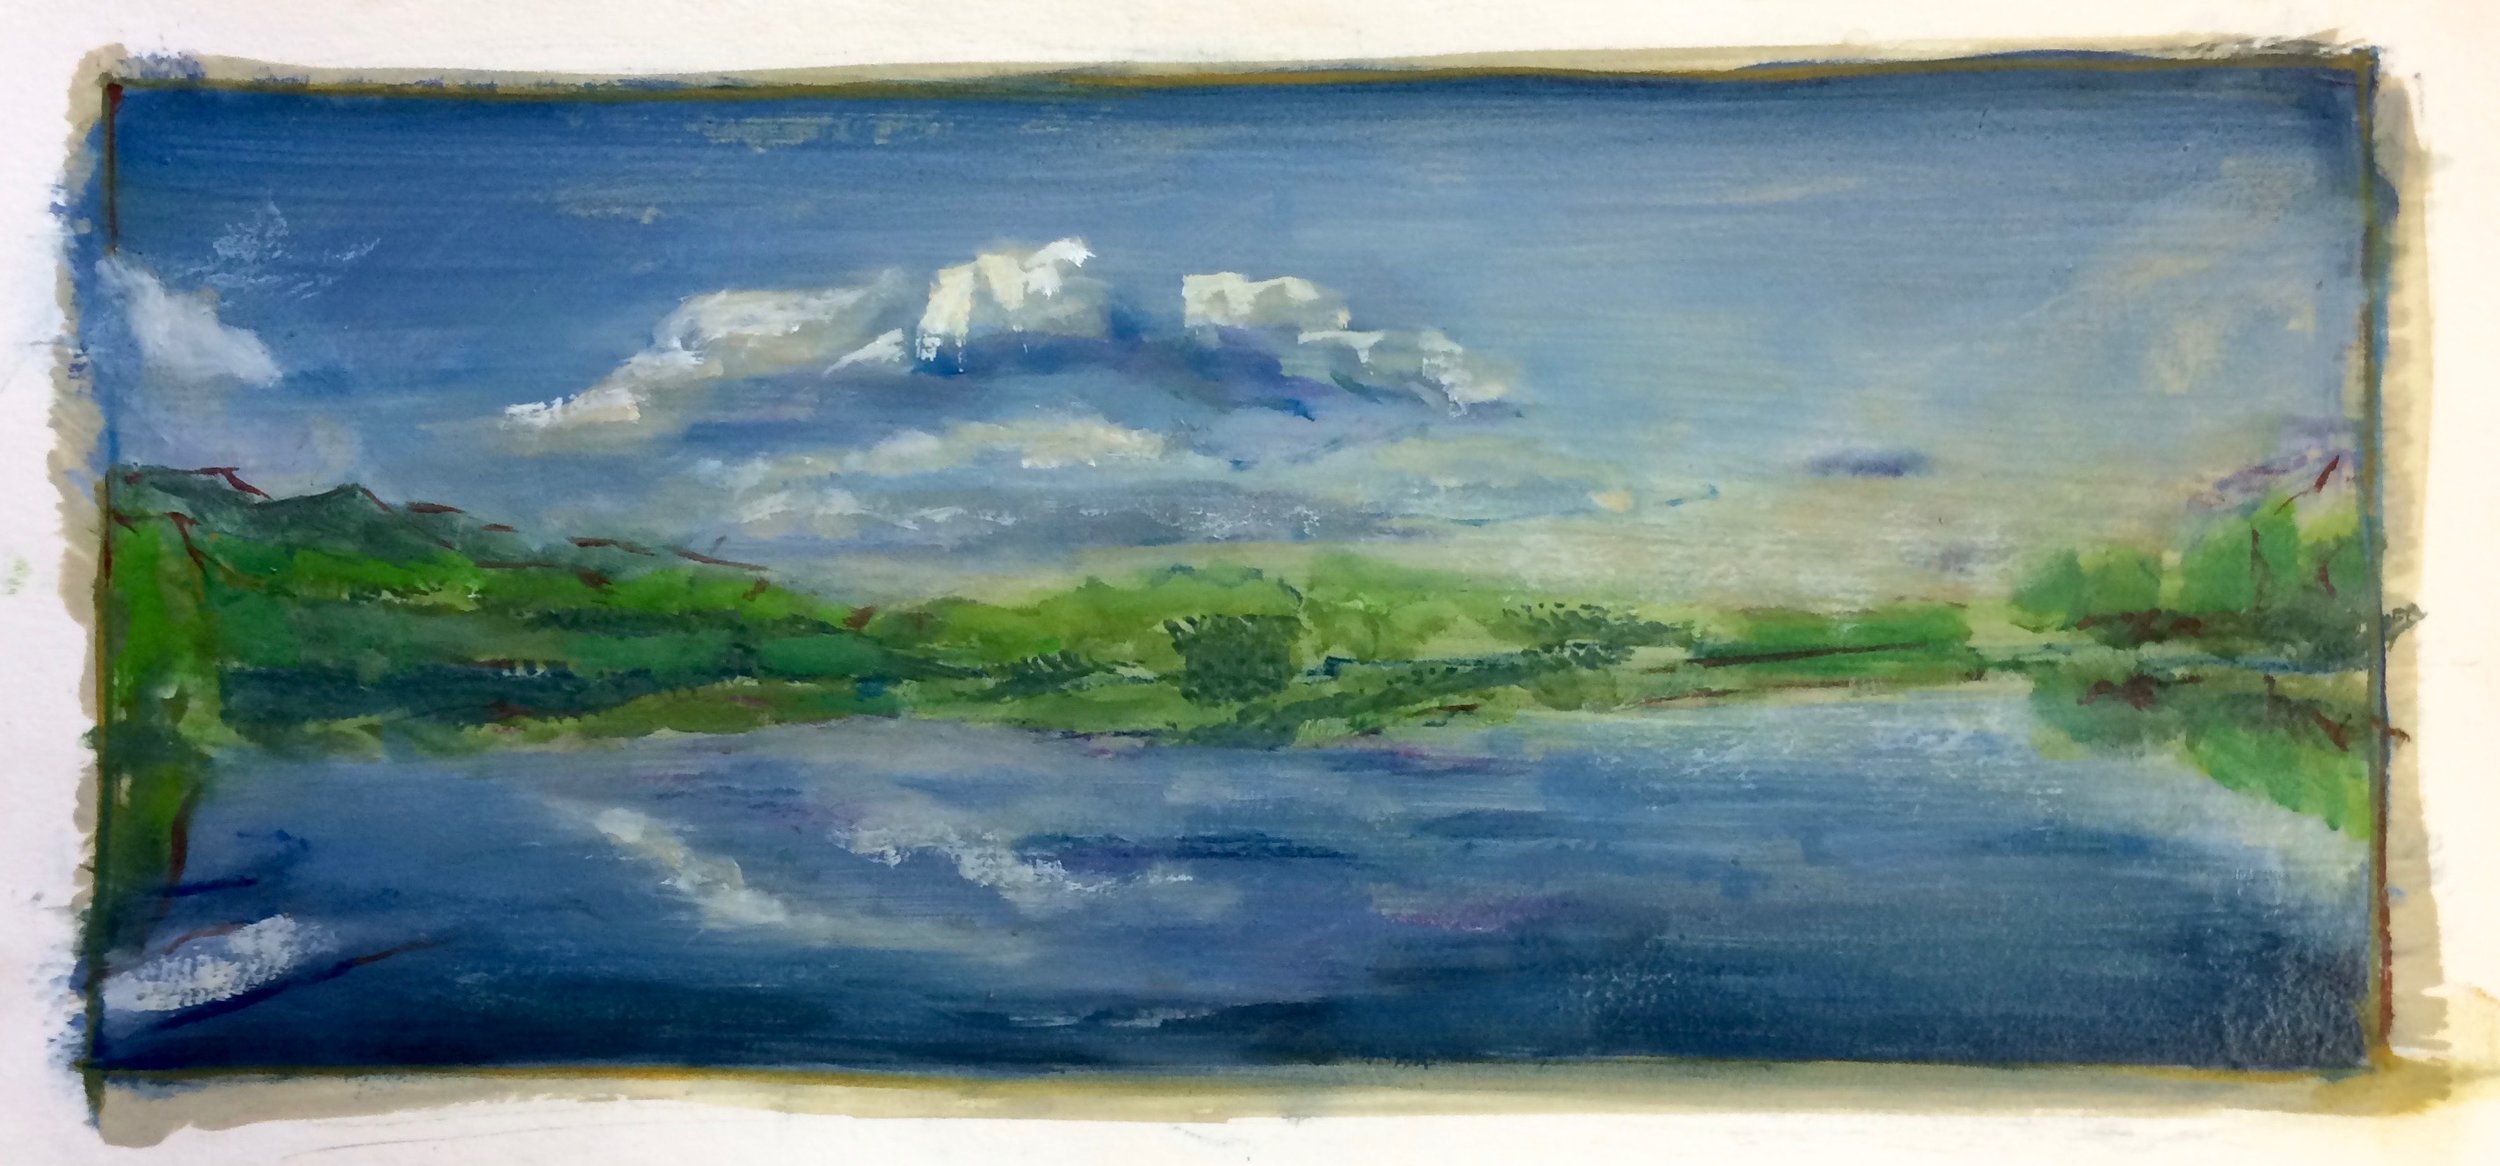 Lake Scape # 5. Oil on Primed Arches, 13 x 5 inches. 2018.